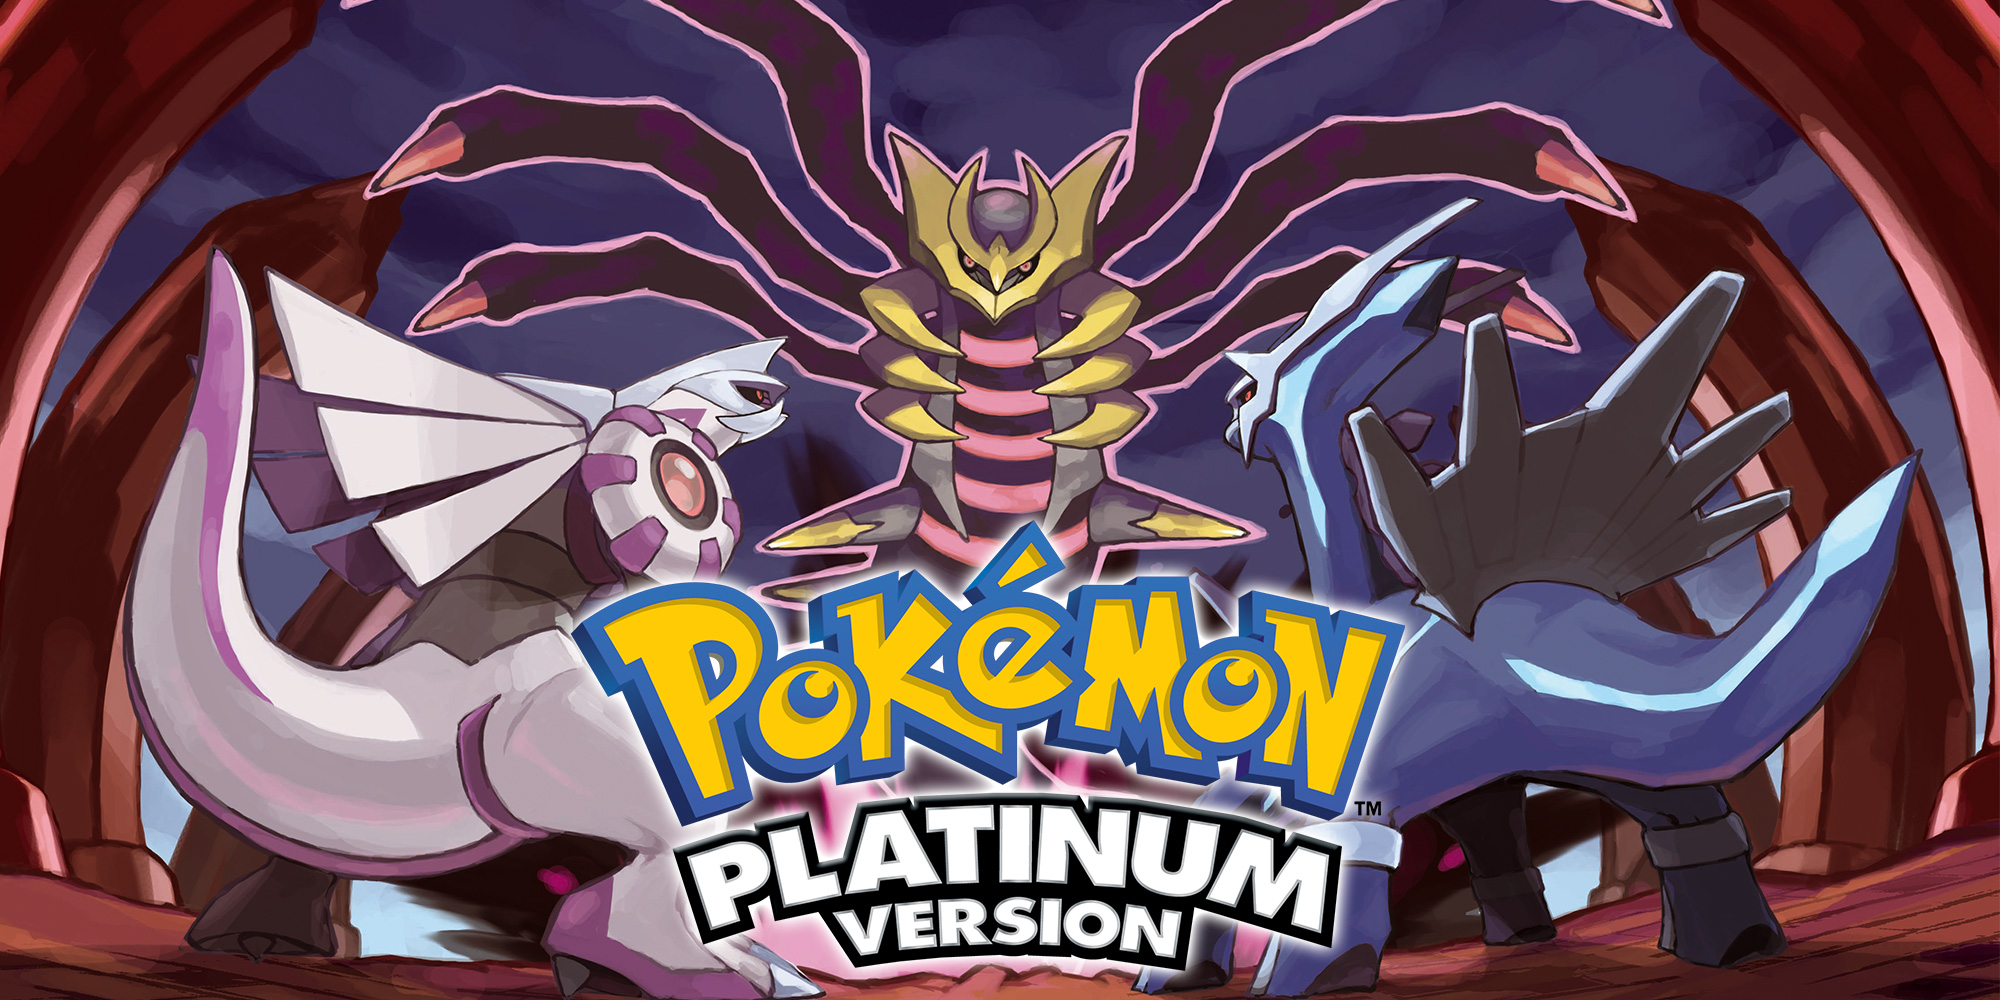 All pokemon nds games platinum guide2017 lw